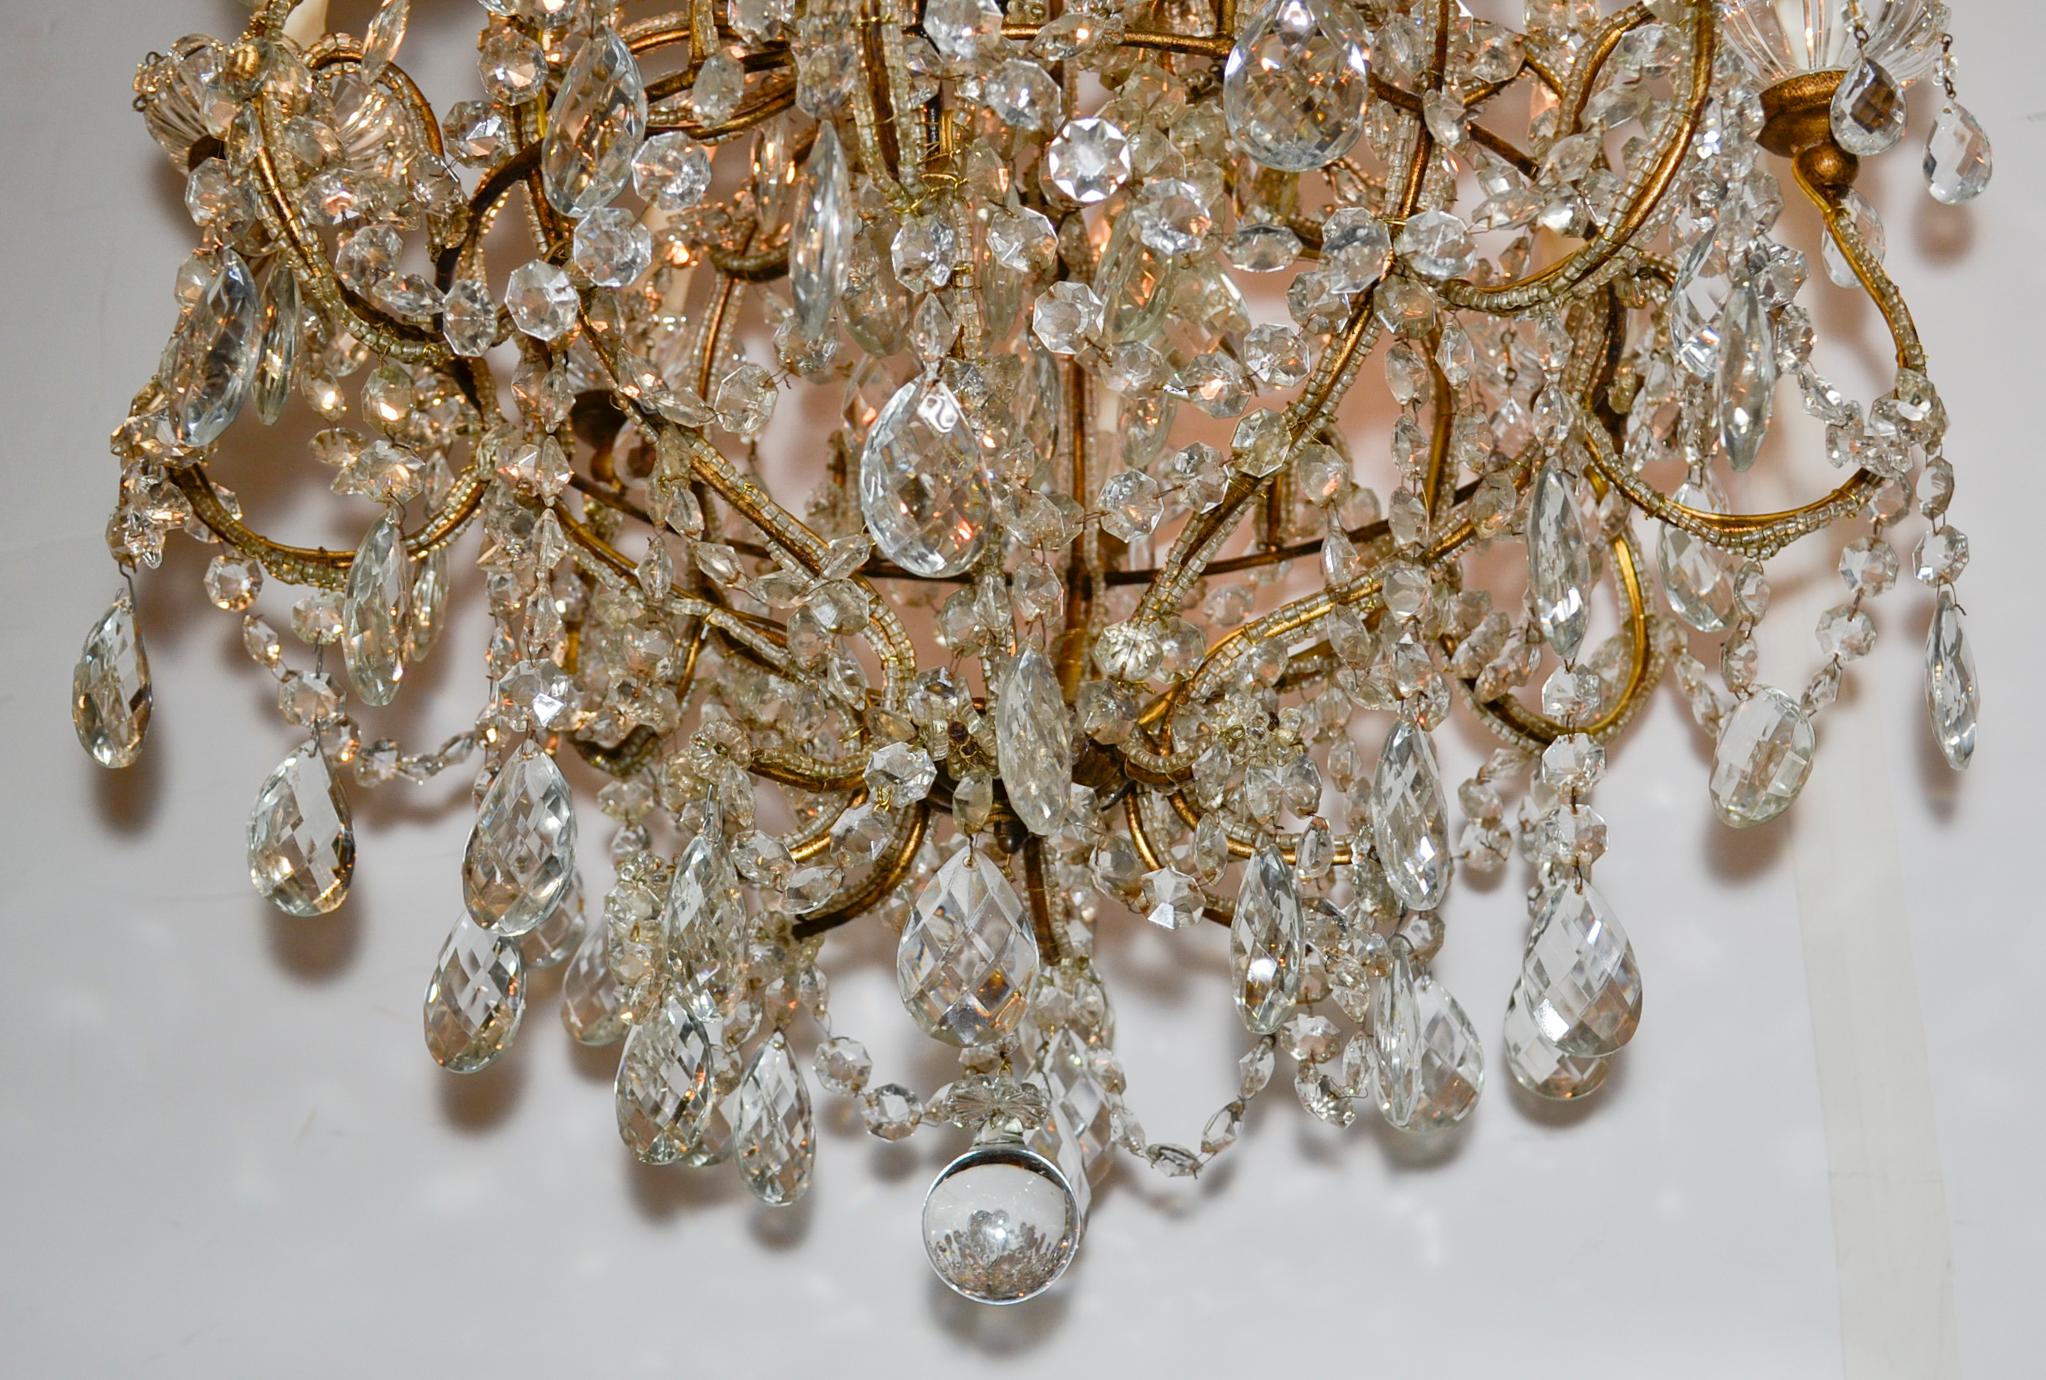 Delightful antique French beaded crystal 8-light chandelier.